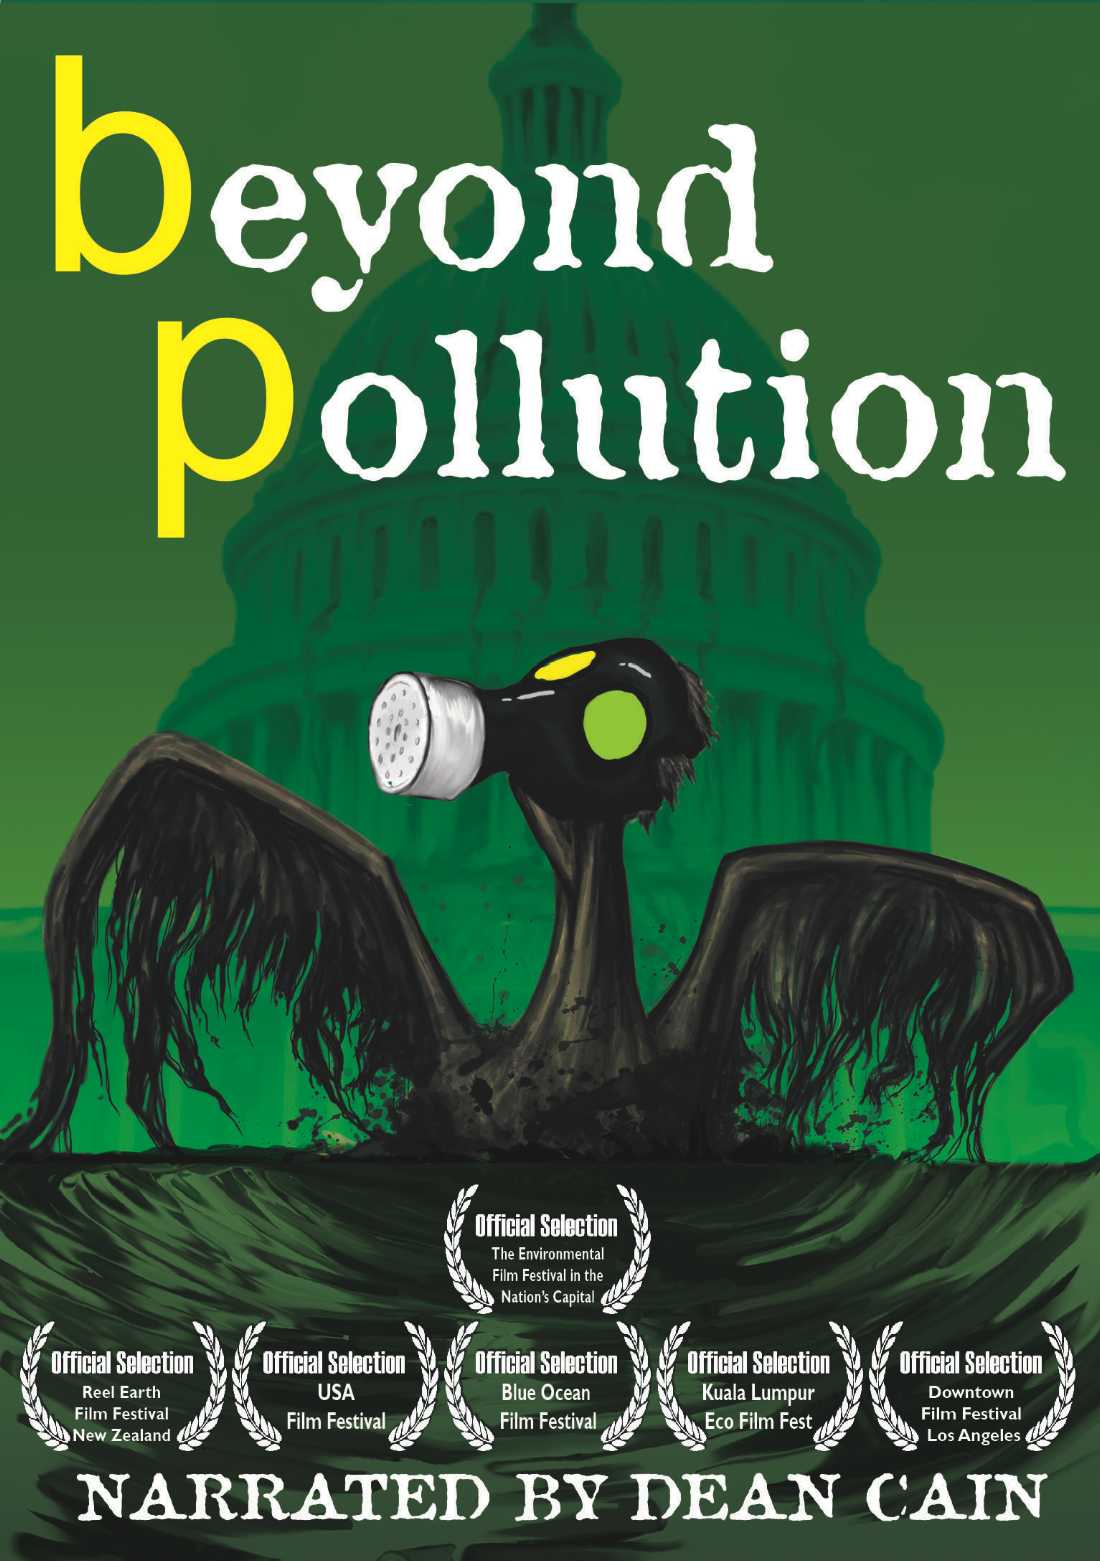 Beyond Pollution screens Wednesday at 7pm at Fort Worth Botanic Garden.